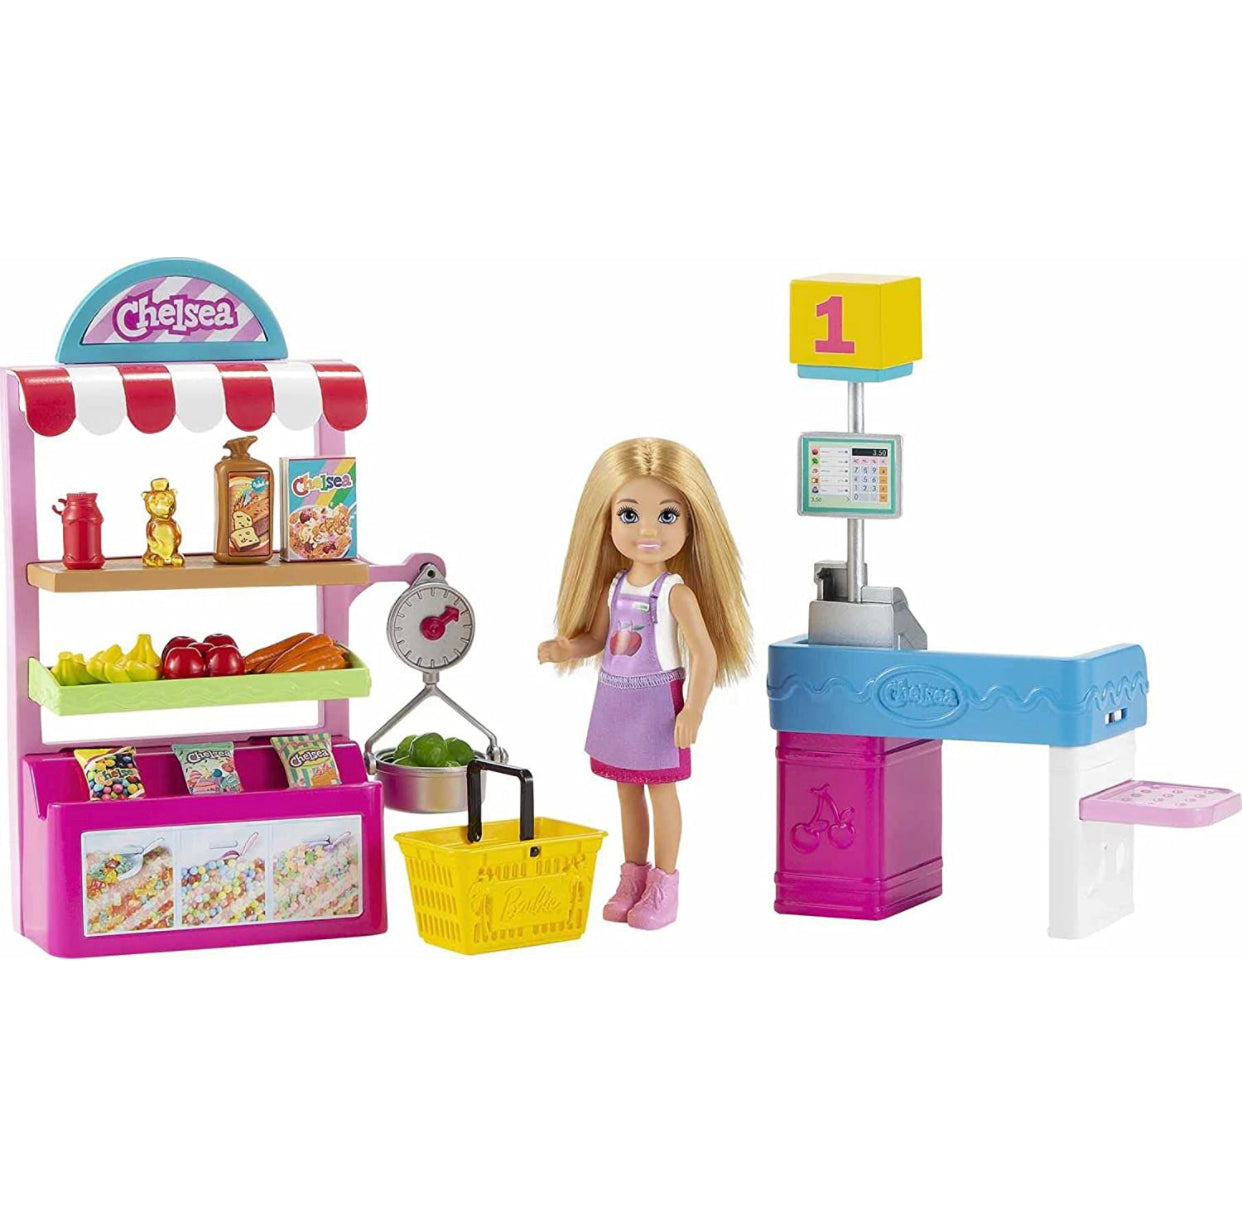 Barbie Chelsea Can Be Snack Stand Playset